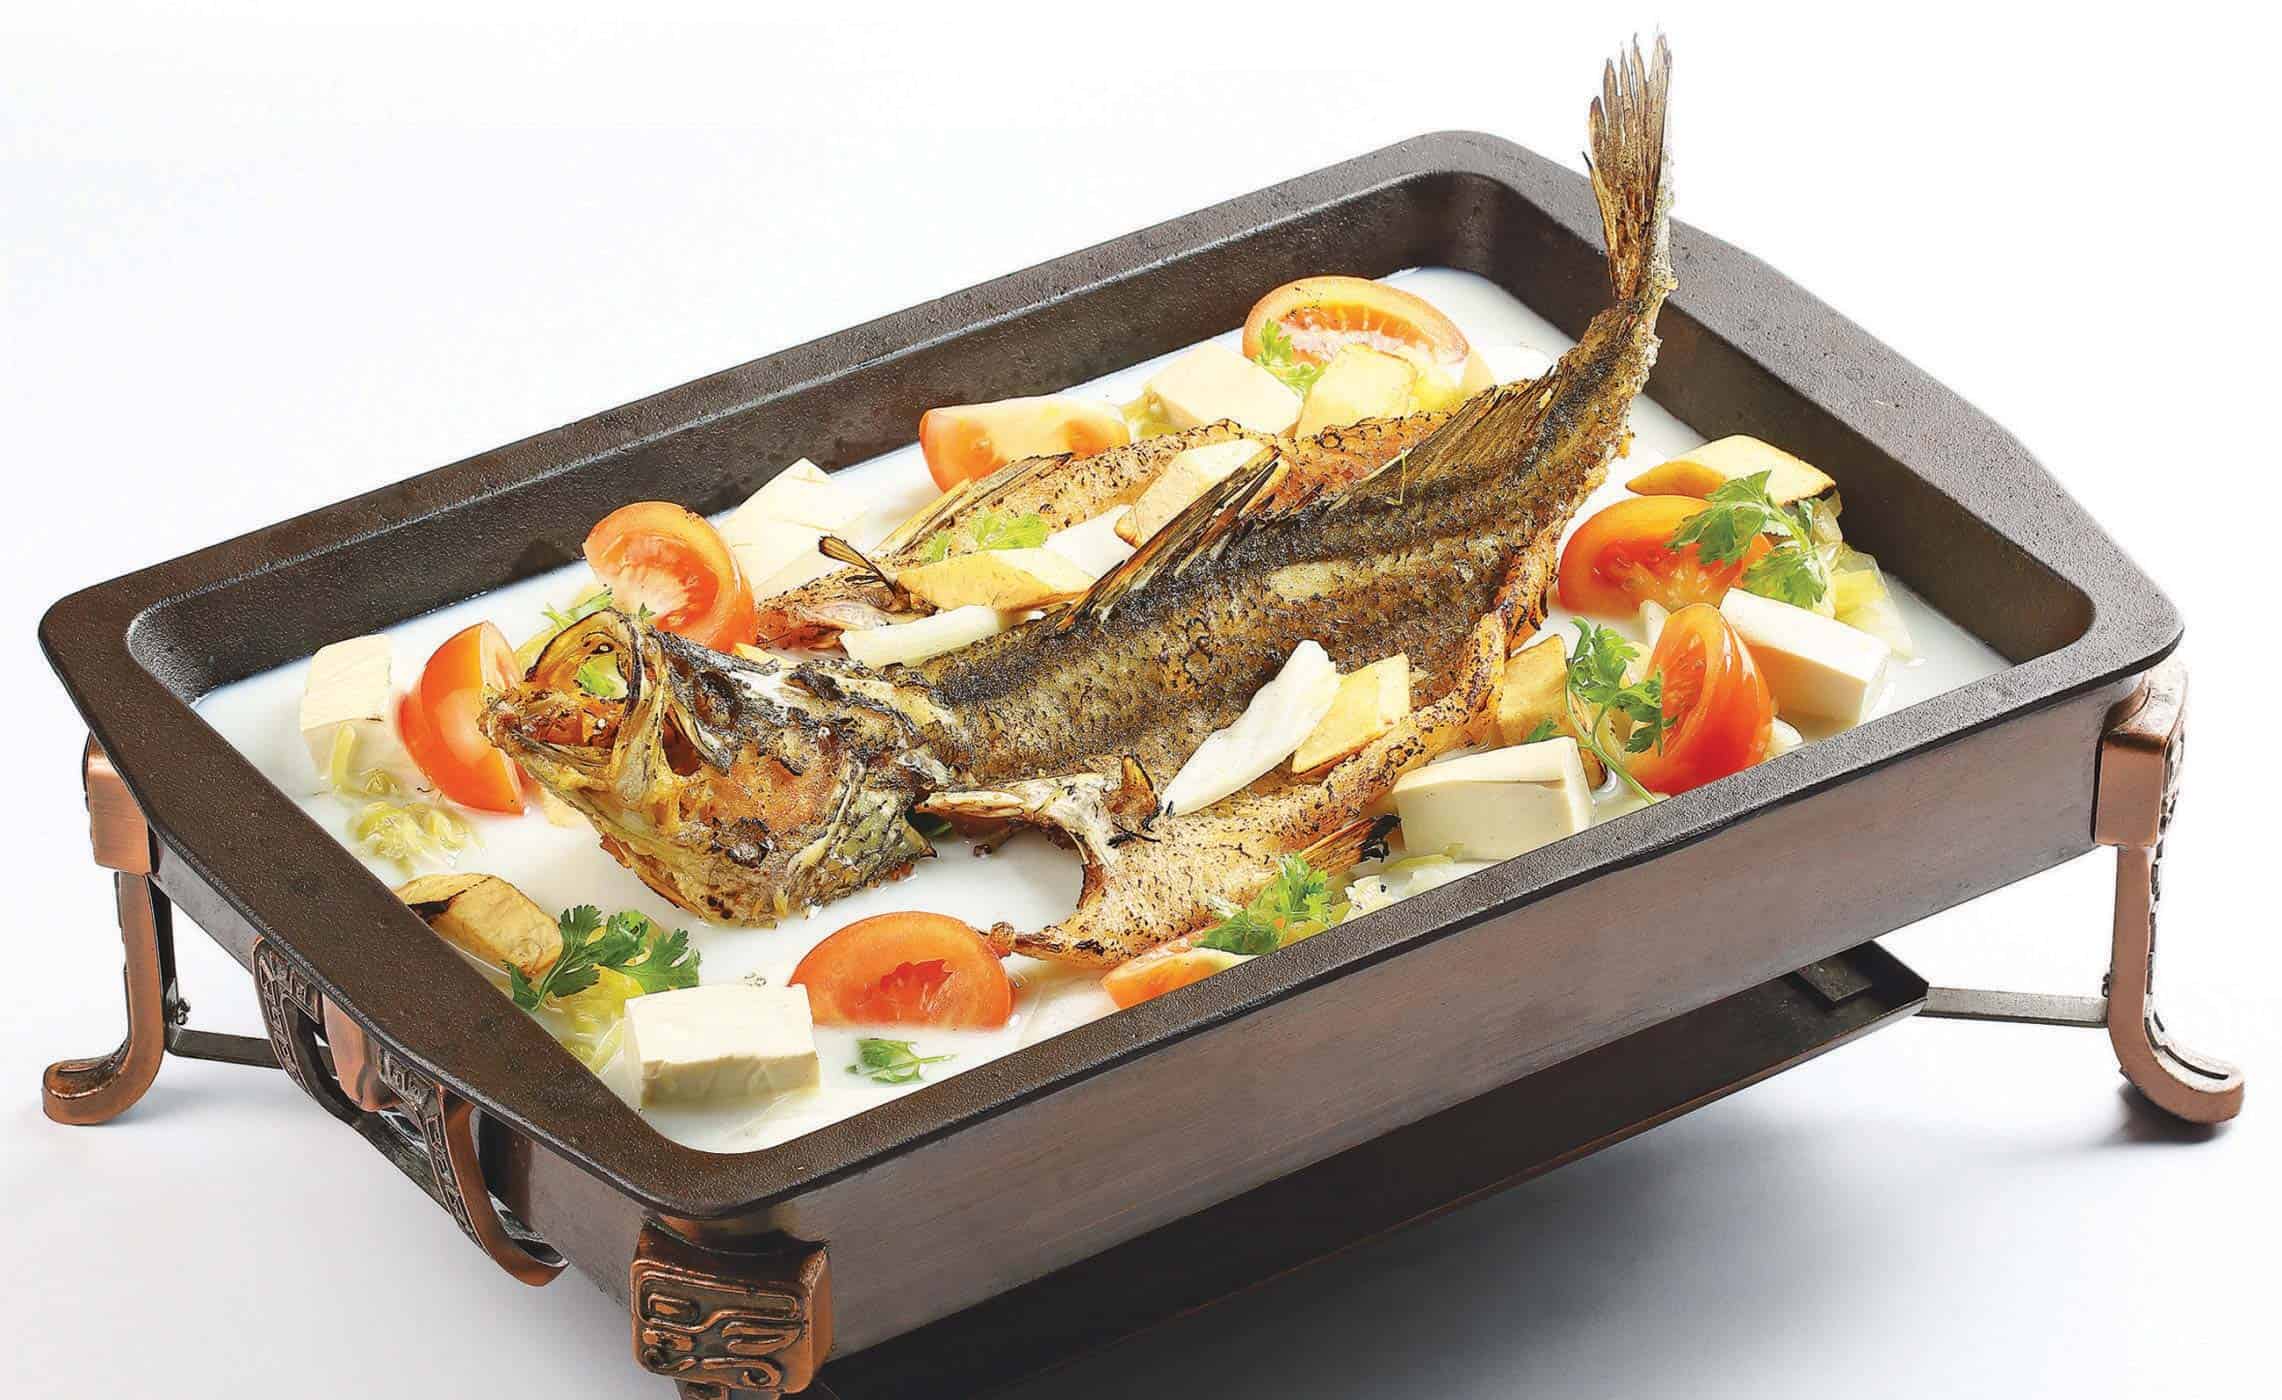 Grilled Fish with Beancurd, Yam, Tomato, Pickled Vegetables and Cabbage in Collagen Broth